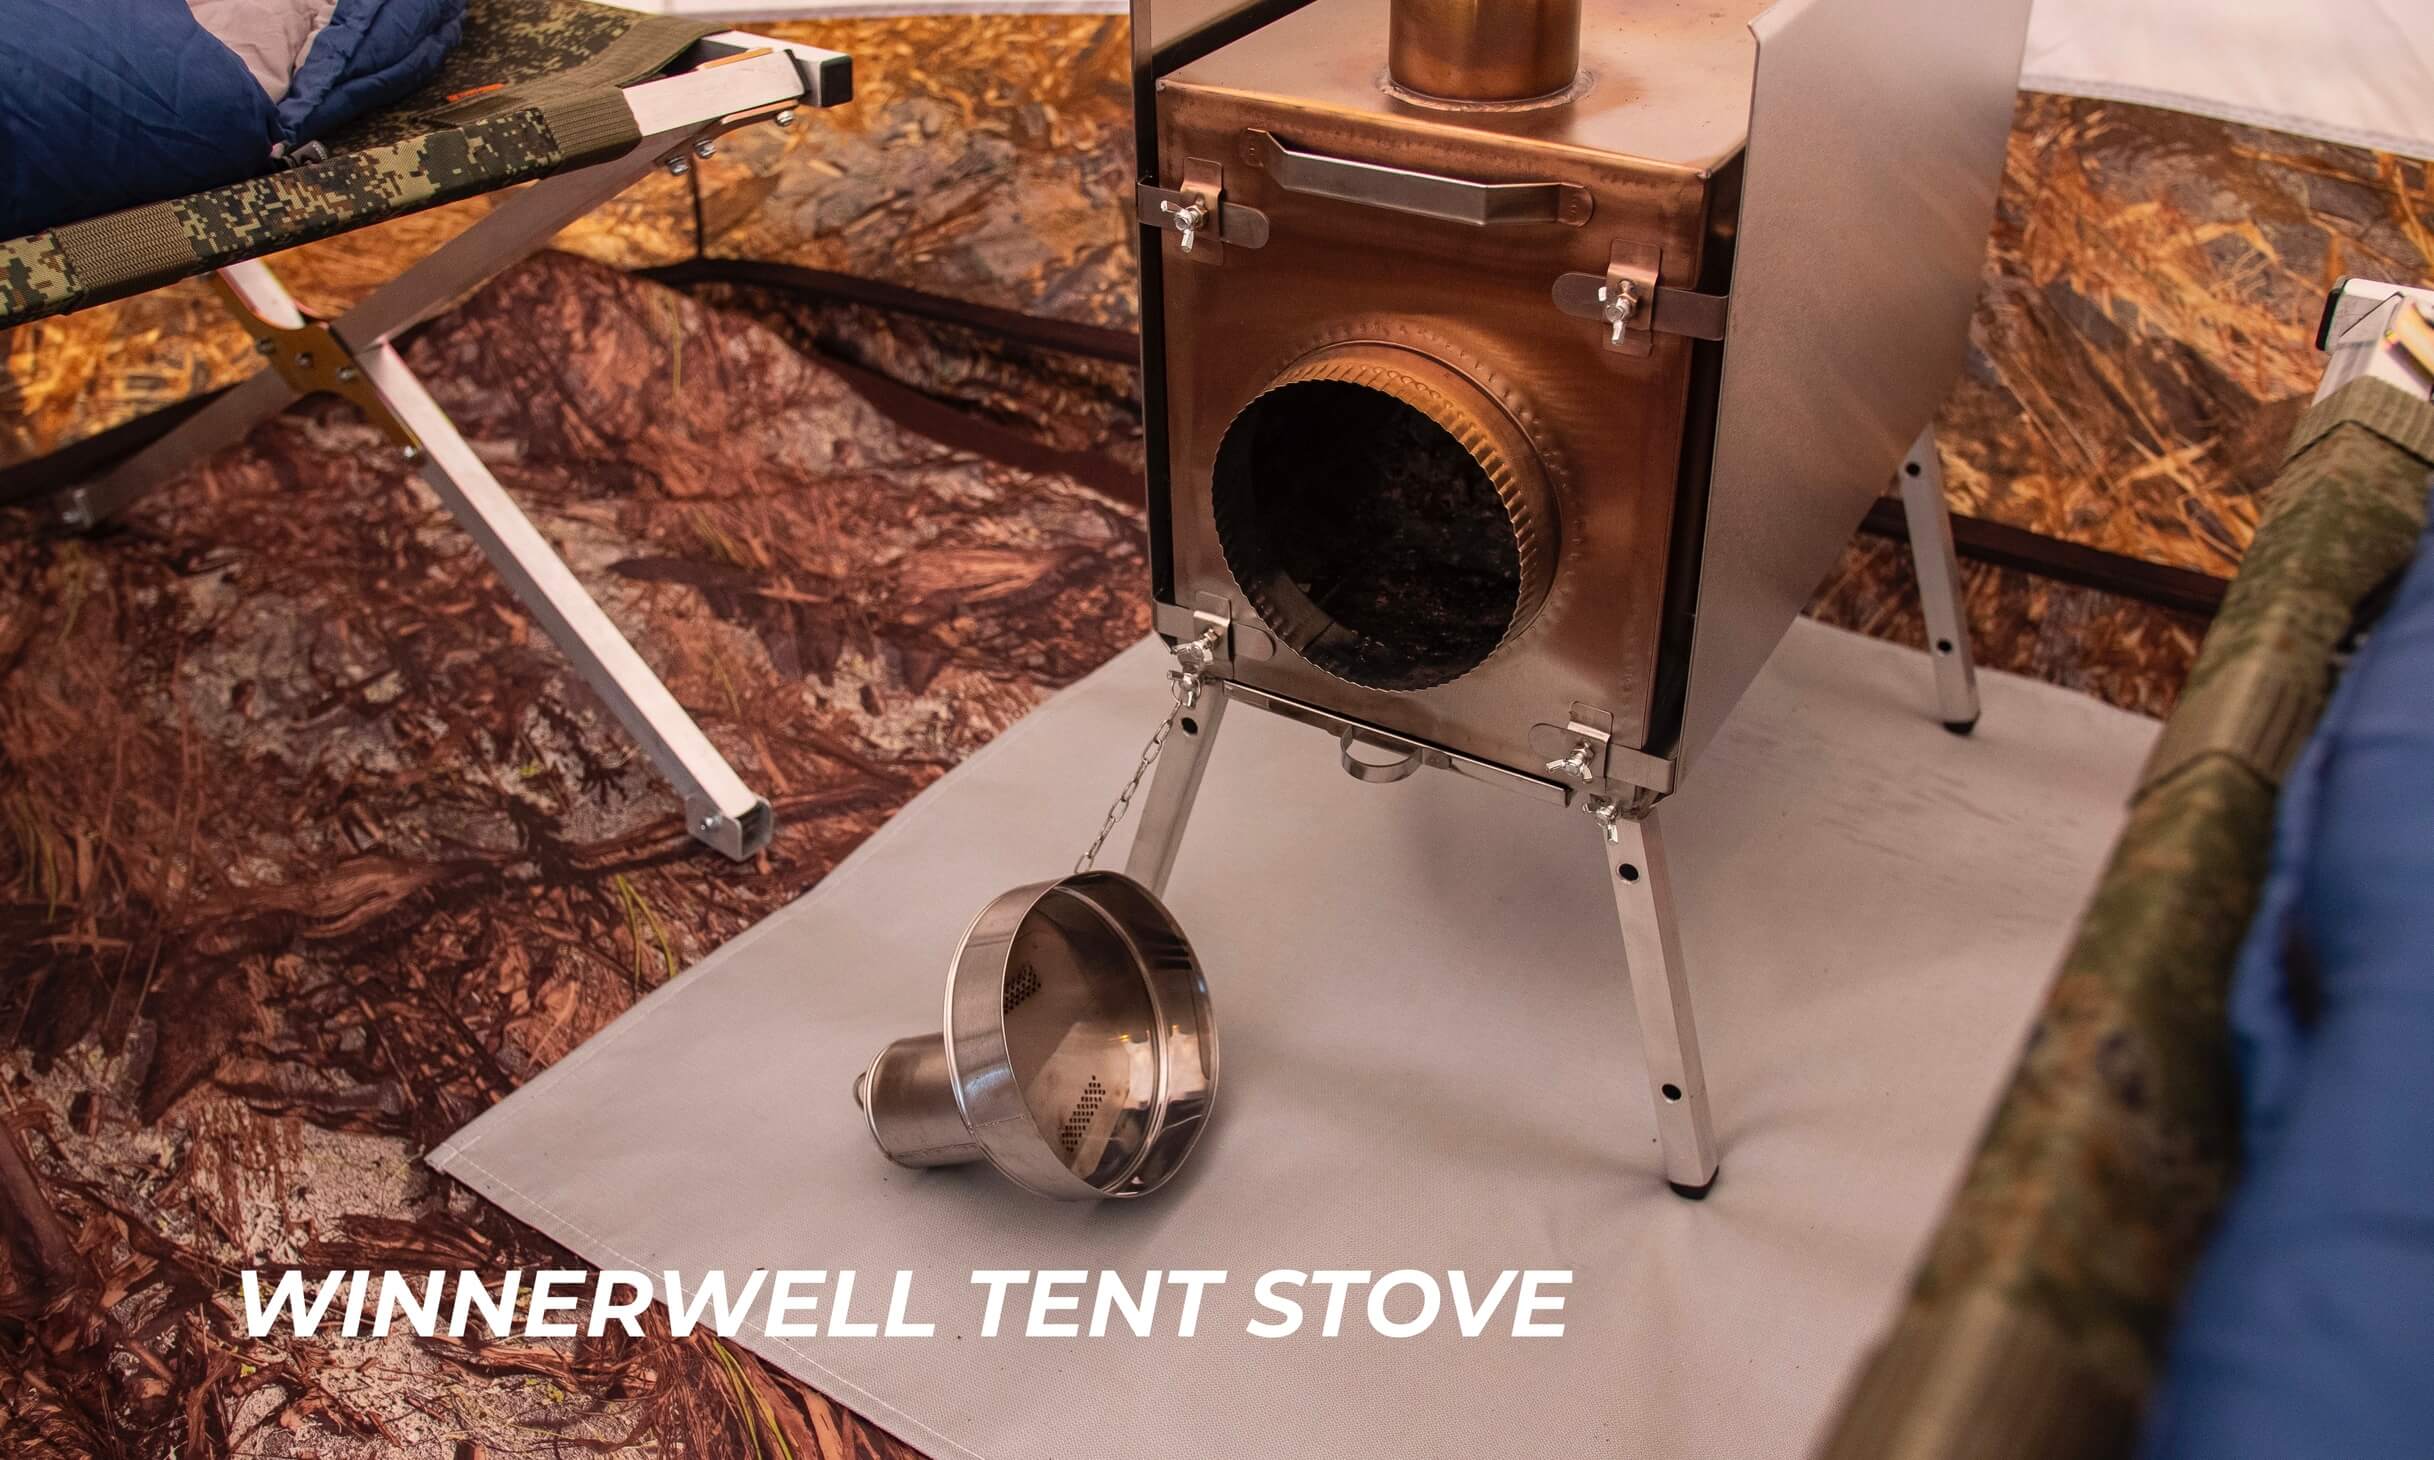 Winnerwell Woodlander Medium Tent Stove | Tiny Portable Wood Burning Stove  for Tents, Shelters, and Camping | 800 Cubic Inch Firebox | Precision